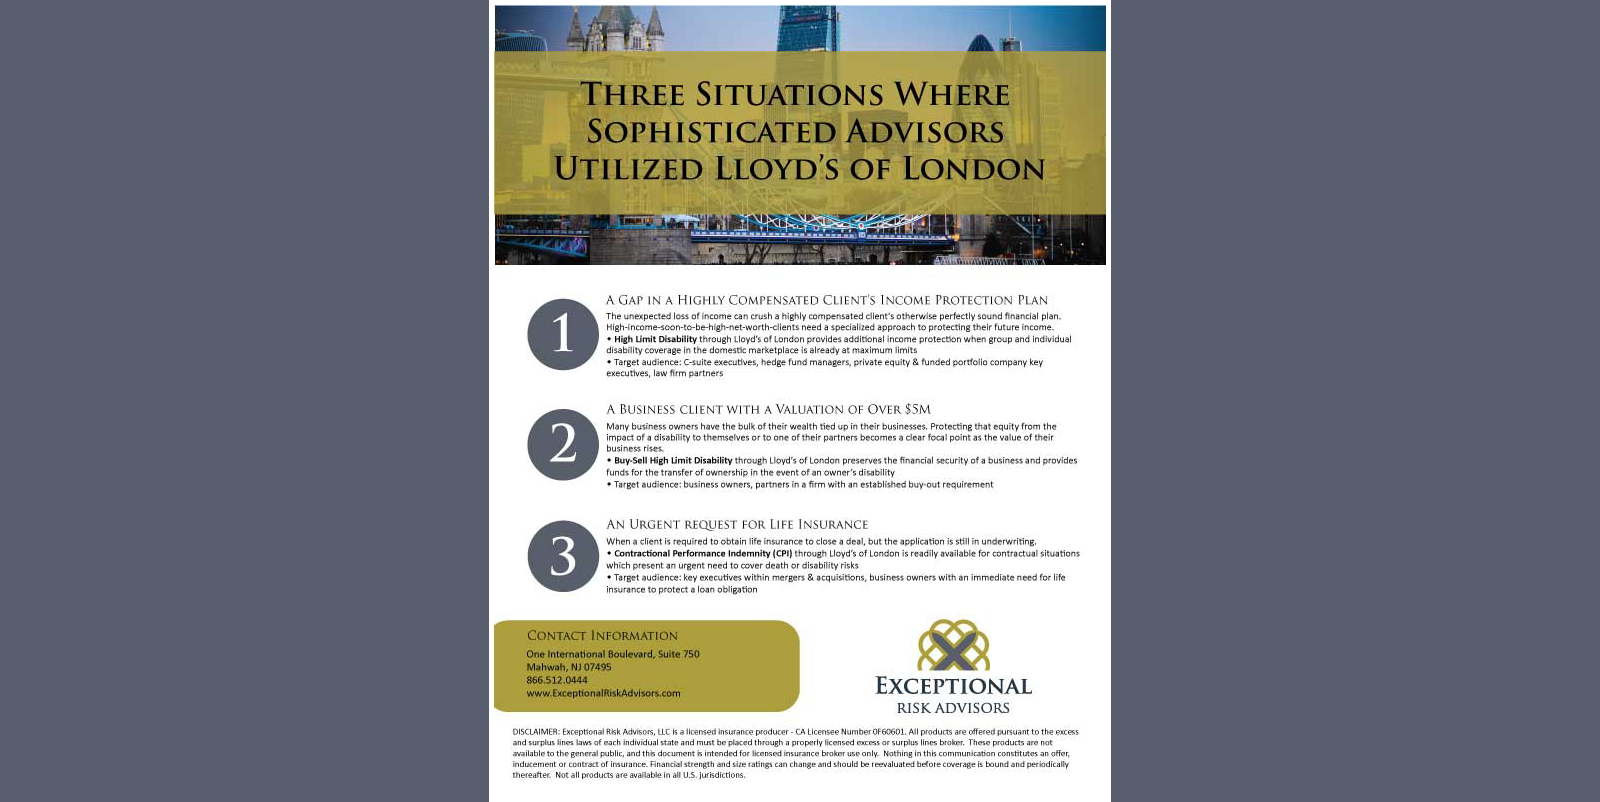 Three Situations Where Sophisticated Advisors Utilized Lloyd's of London